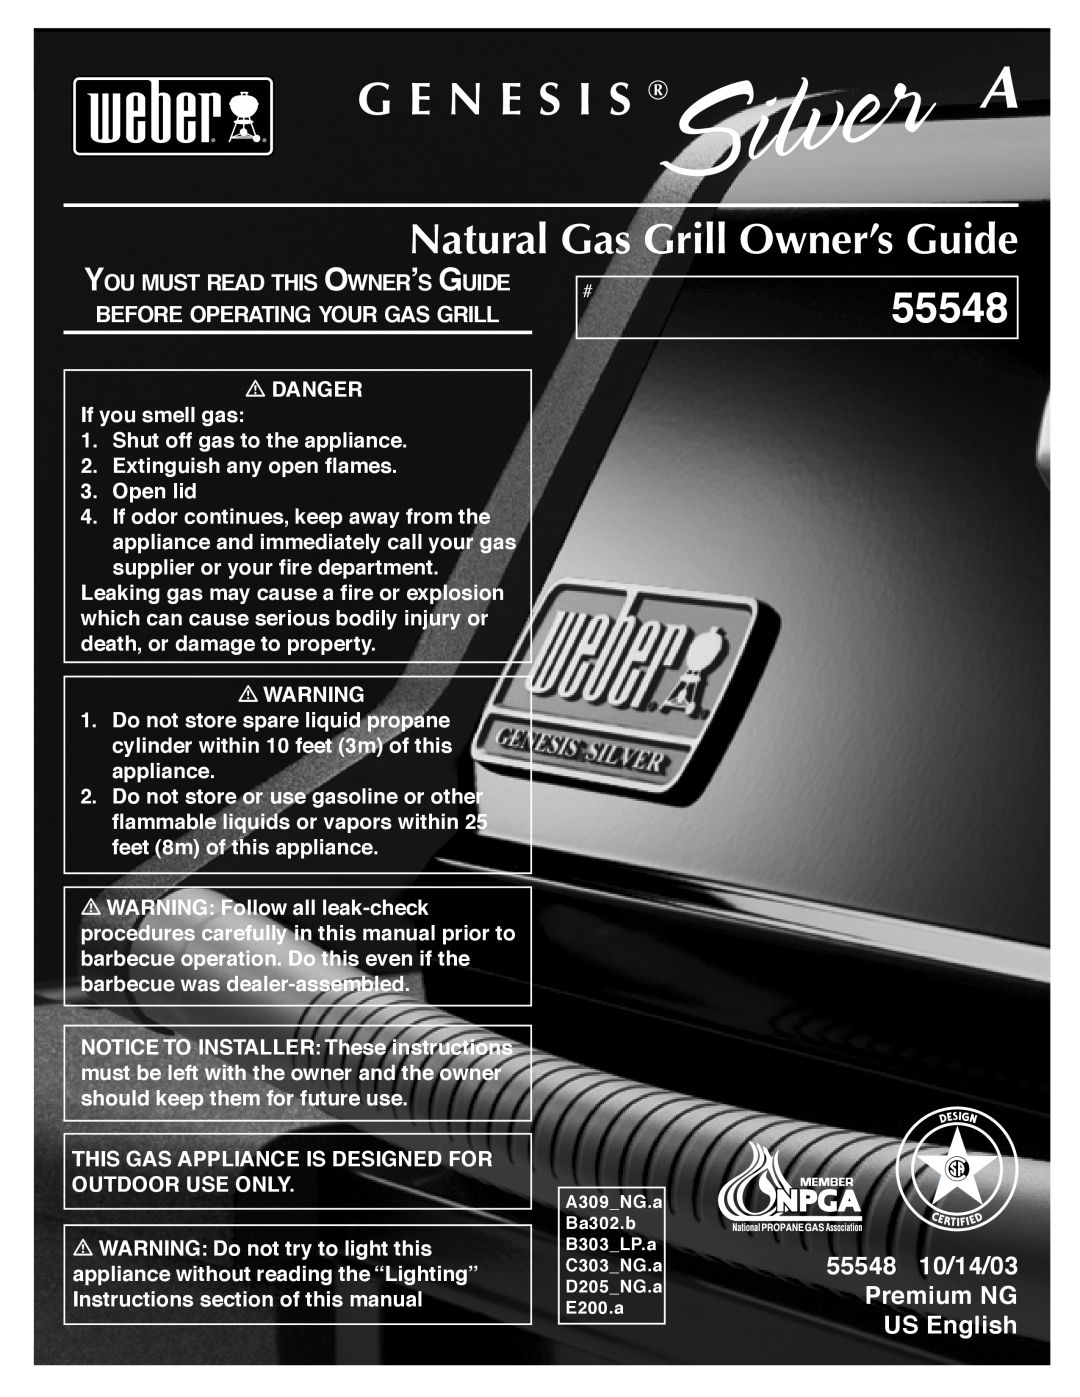 Weber manual Natural Gas Grill Owner’s Guide, G E N E S I S, 55548 10/14/03 Premium NG US English 